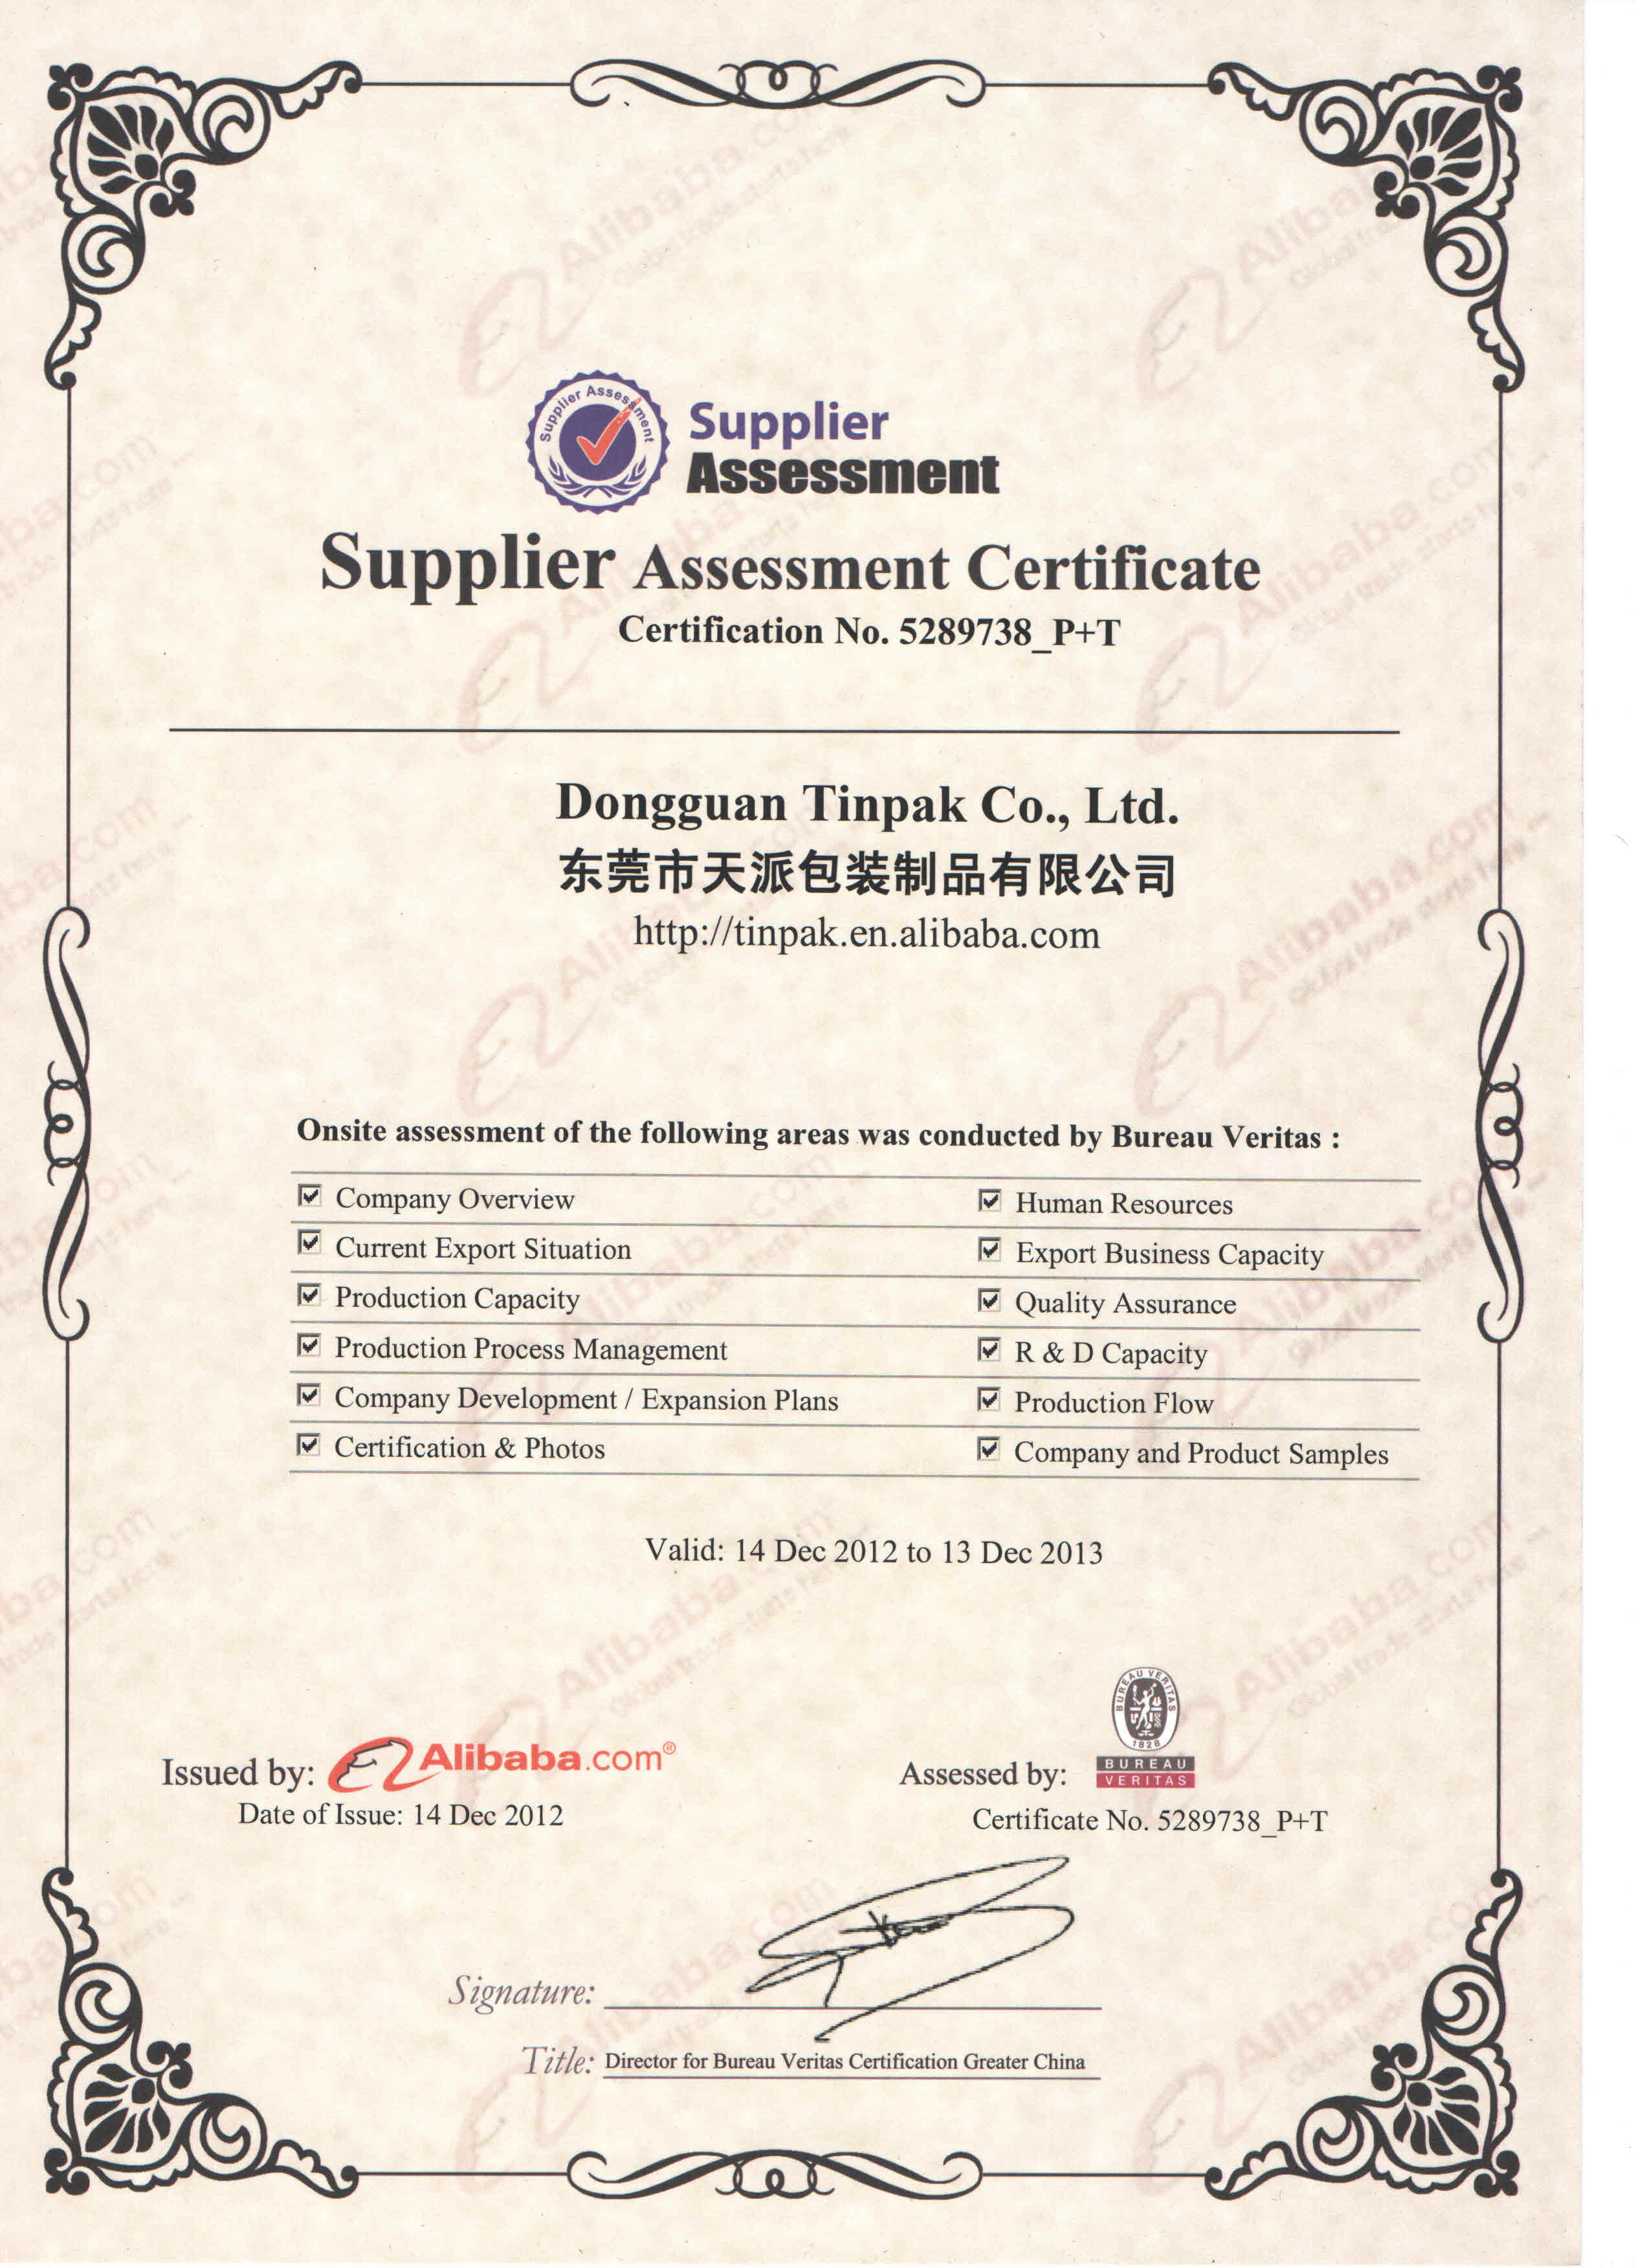 BV assessed tin box company in China